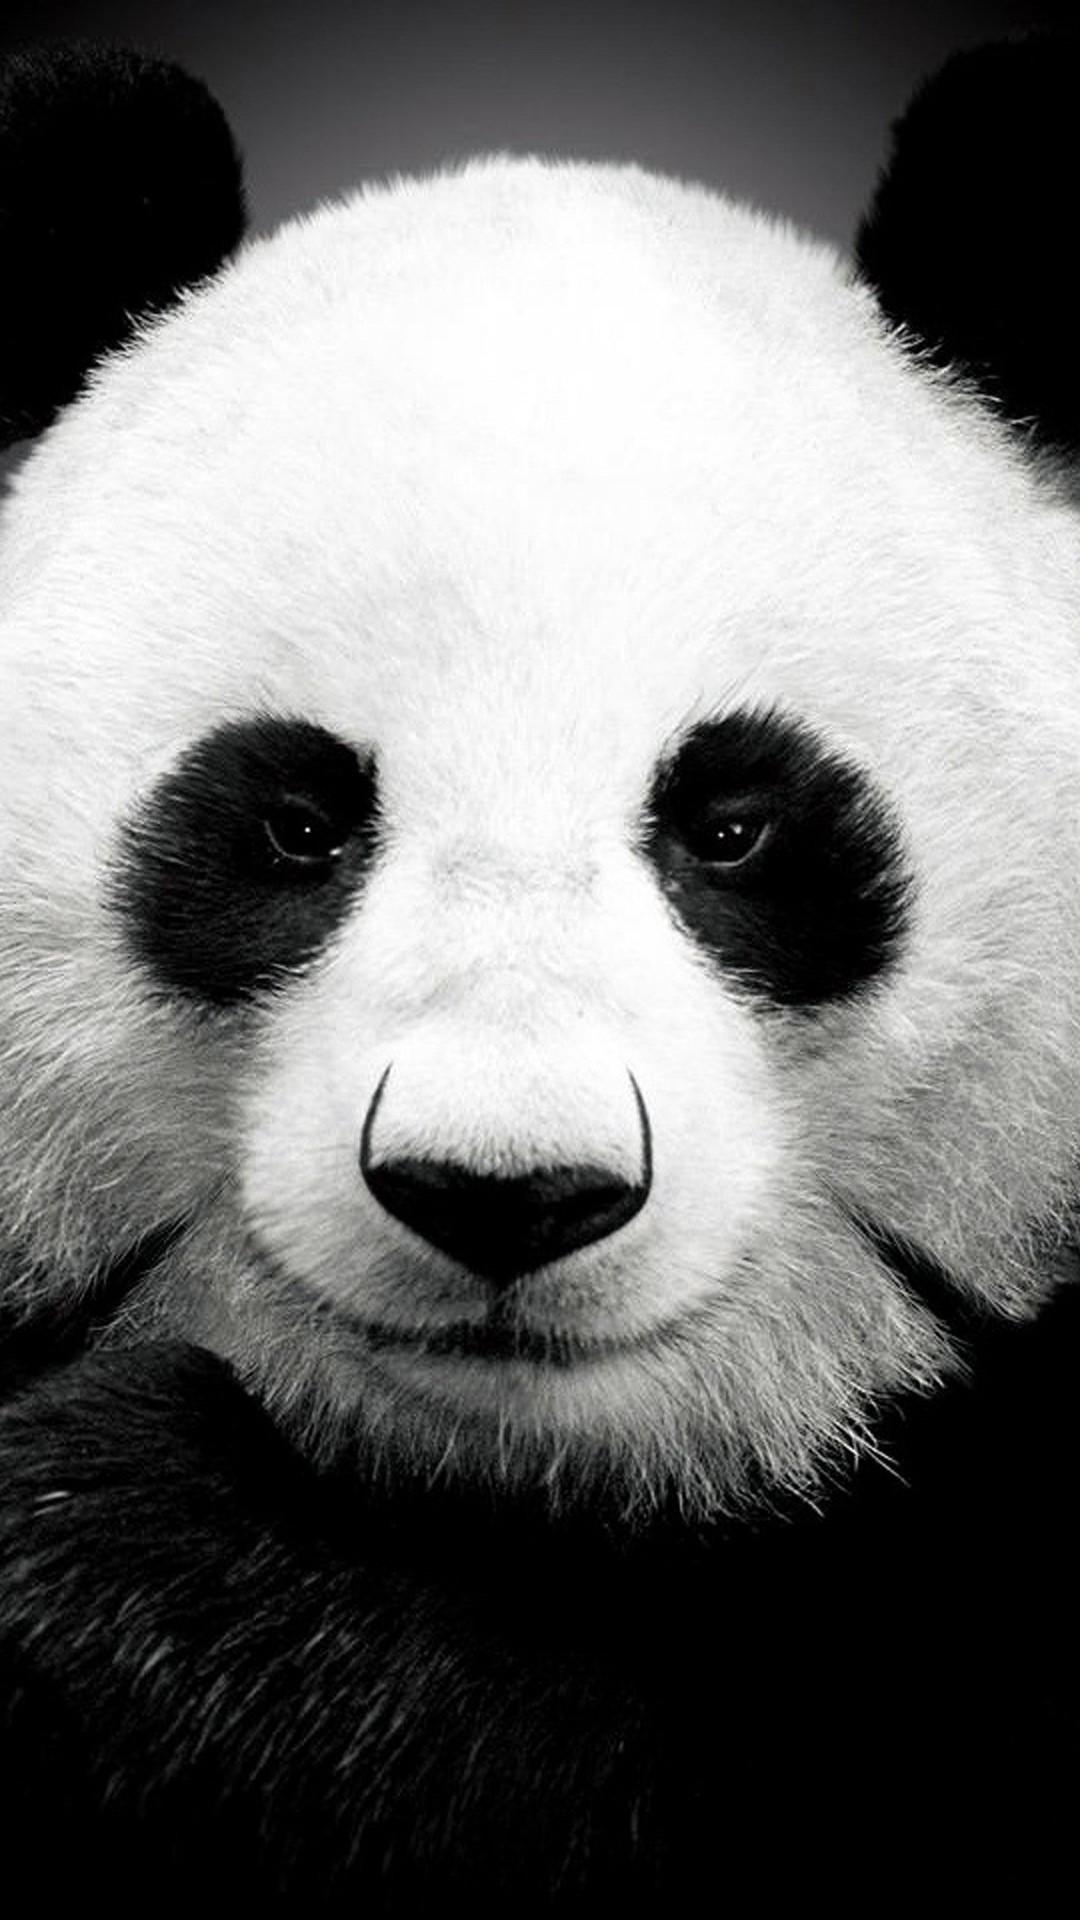 1080x1920 Panda Wallpapers for Galaxy S5